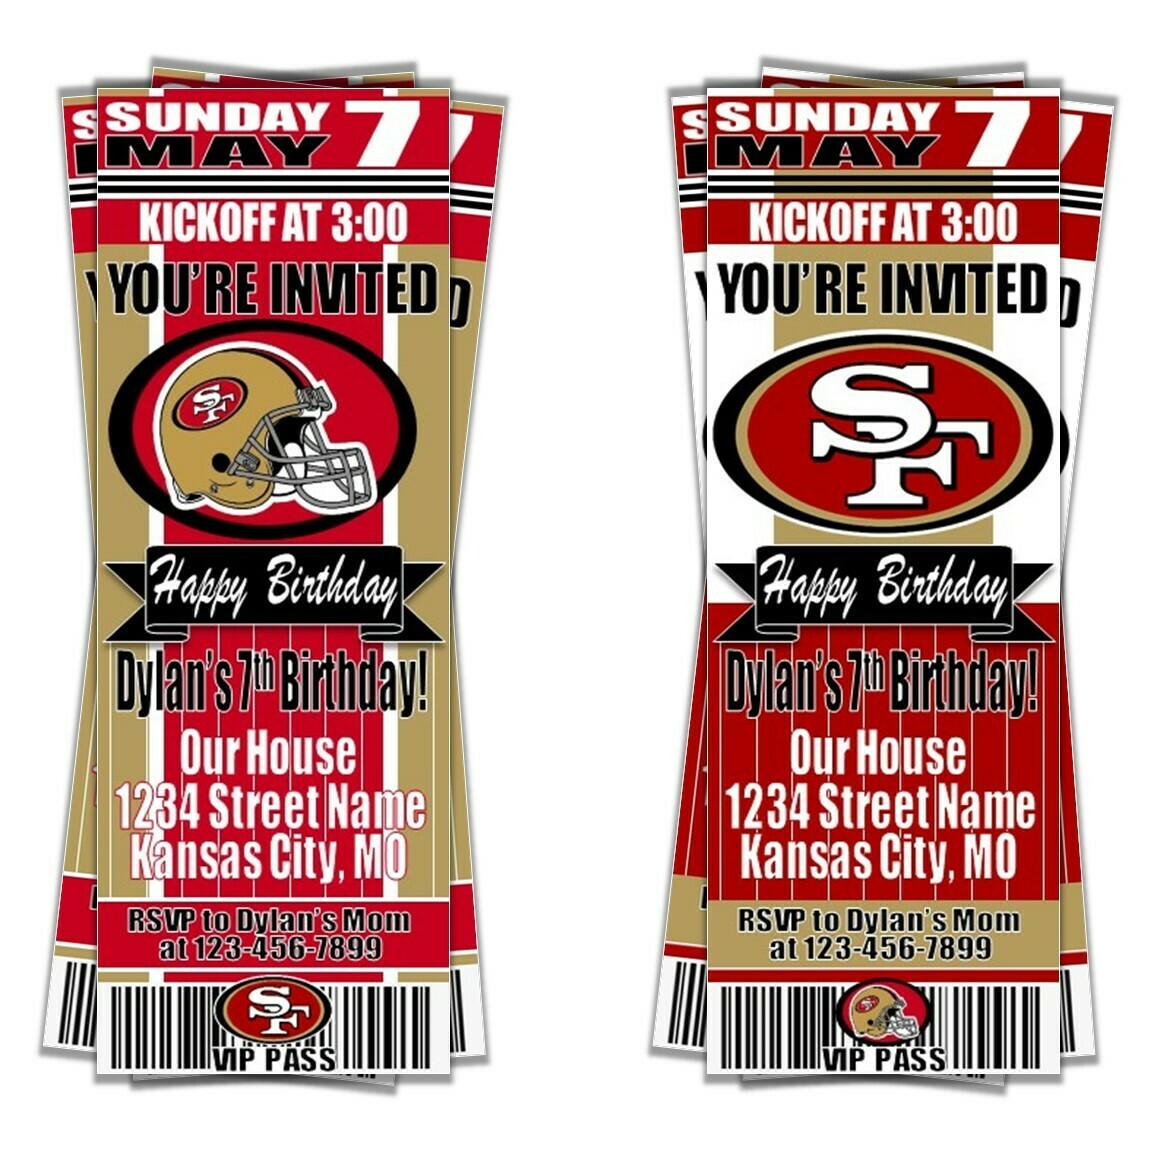 nfl niners tickets